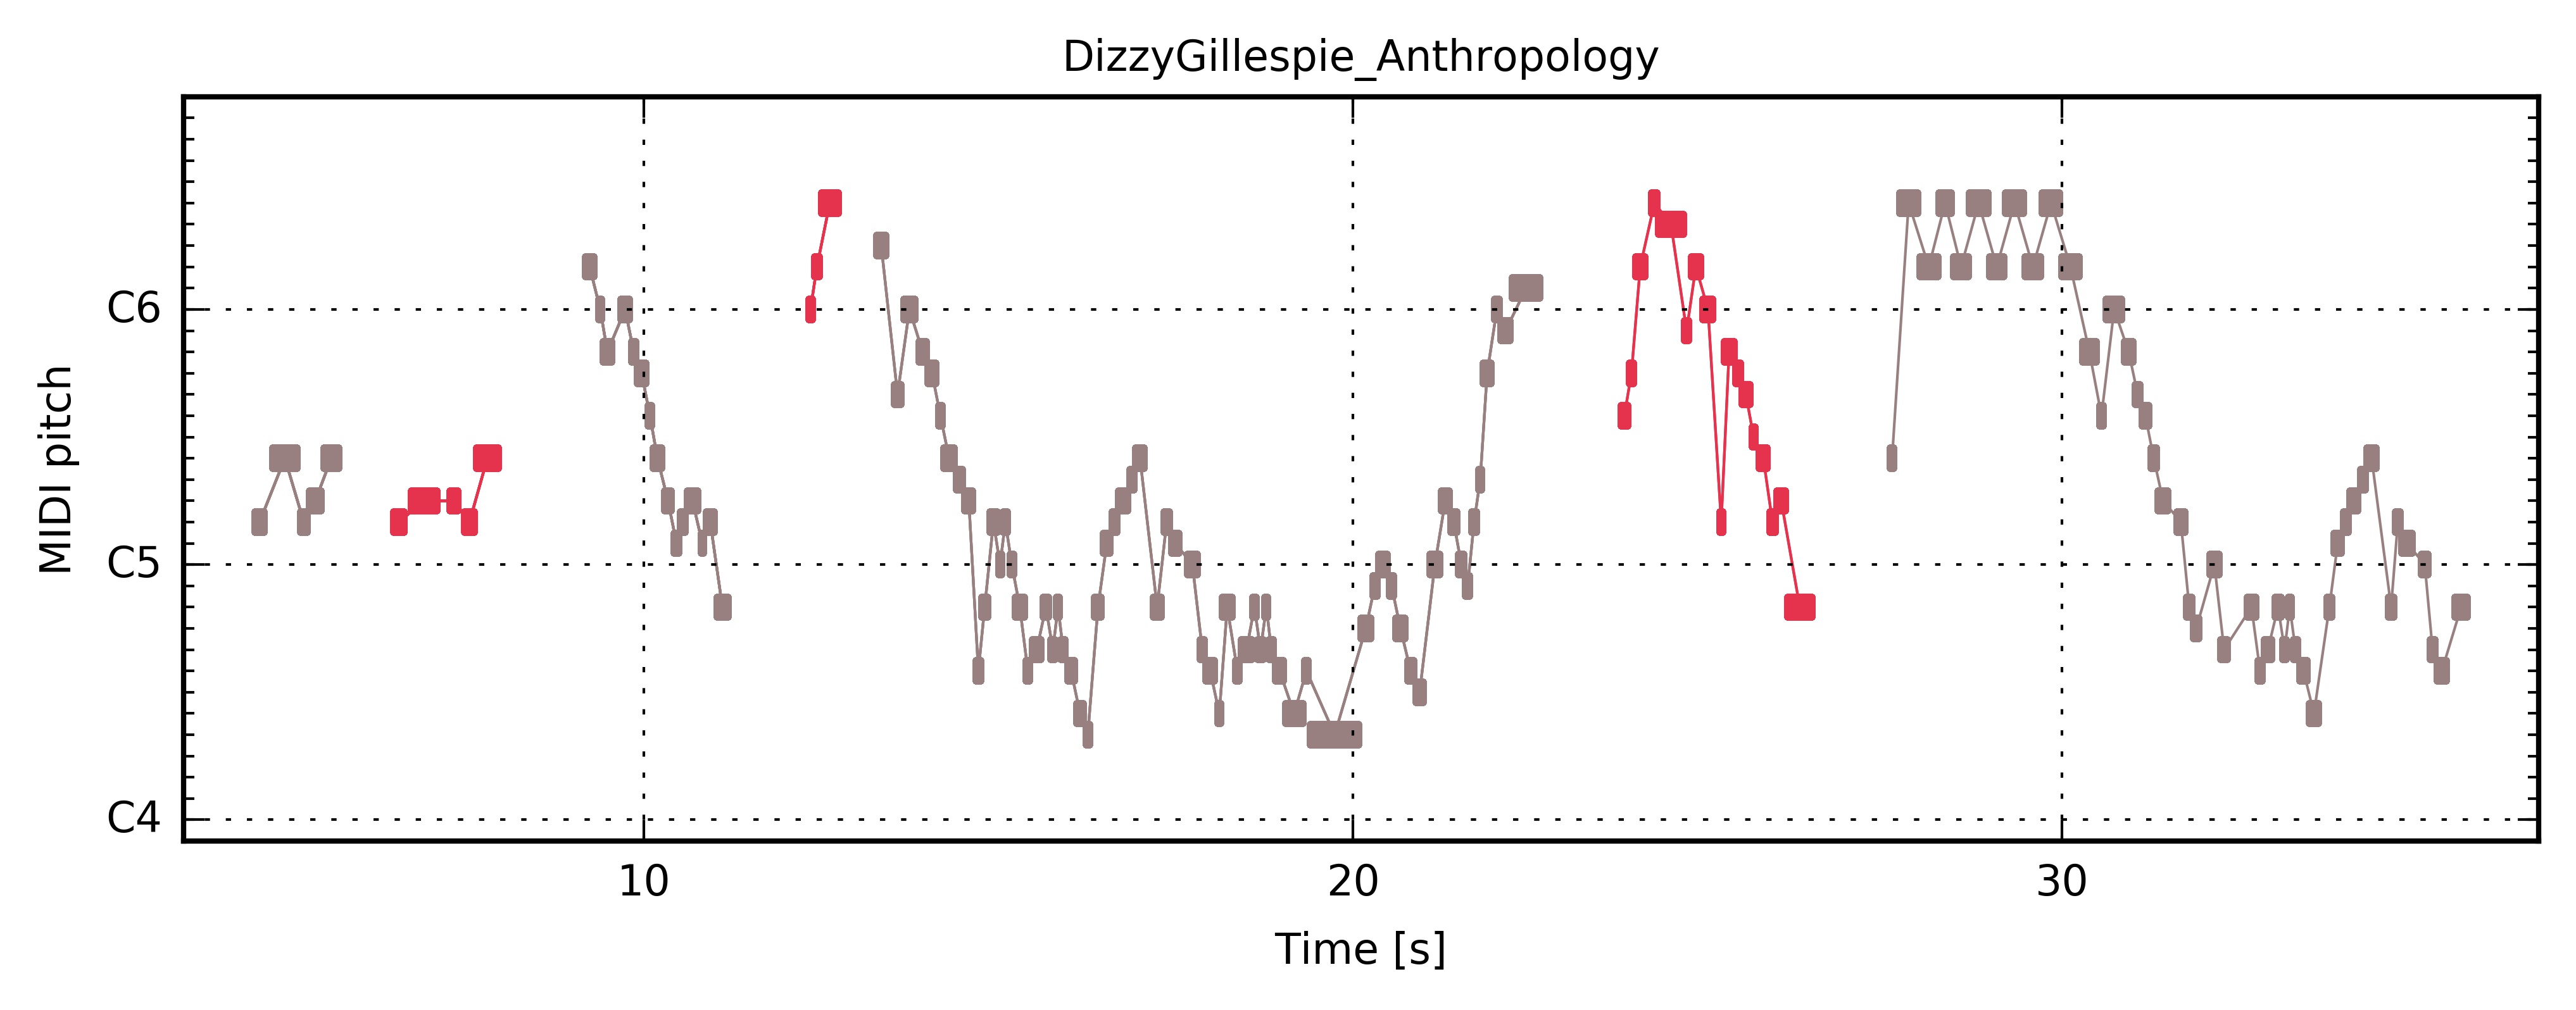 ../../_images/PianoRoll_DizzyGillespie_Anthropology.jpg